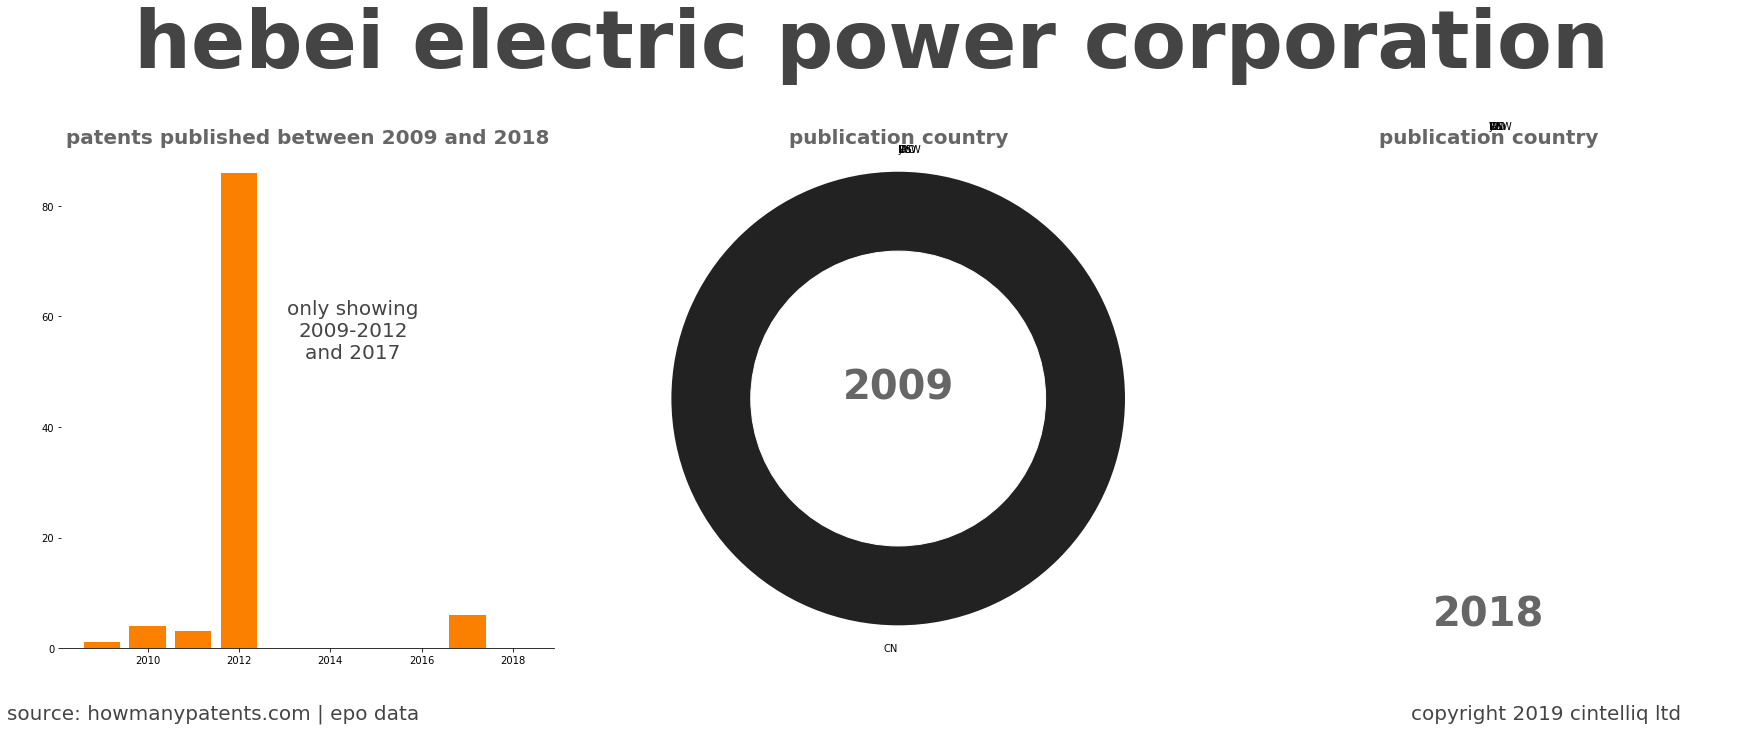 summary of patents for Hebei Electric Power Corporation